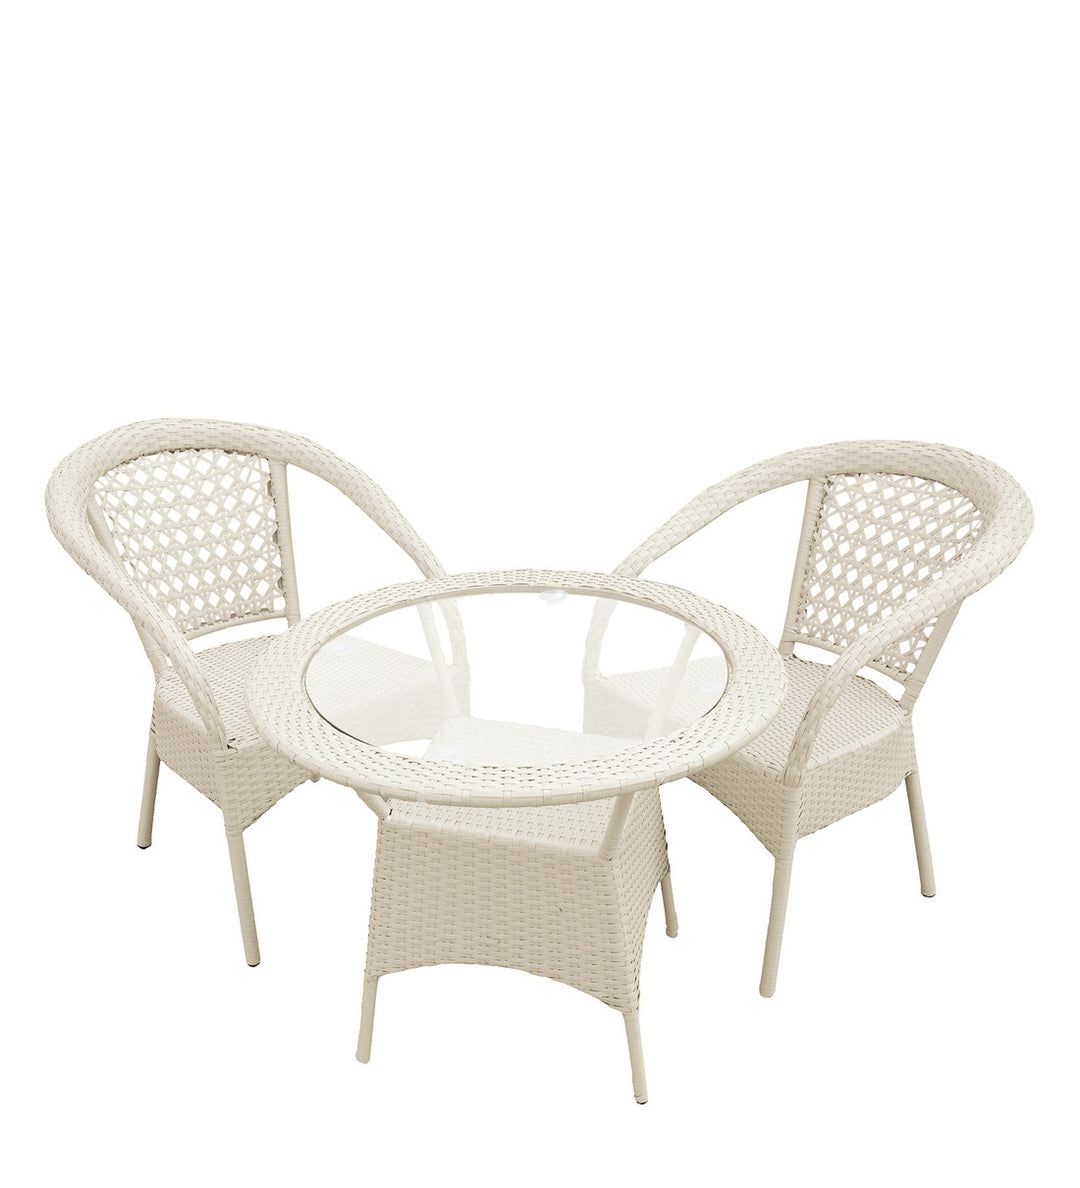 Dreamline Outdoor Furniture Garden Patio Seating Set 1+2 2 Chairs and Table Set Balcony Furniture Coffee Table Set (White)